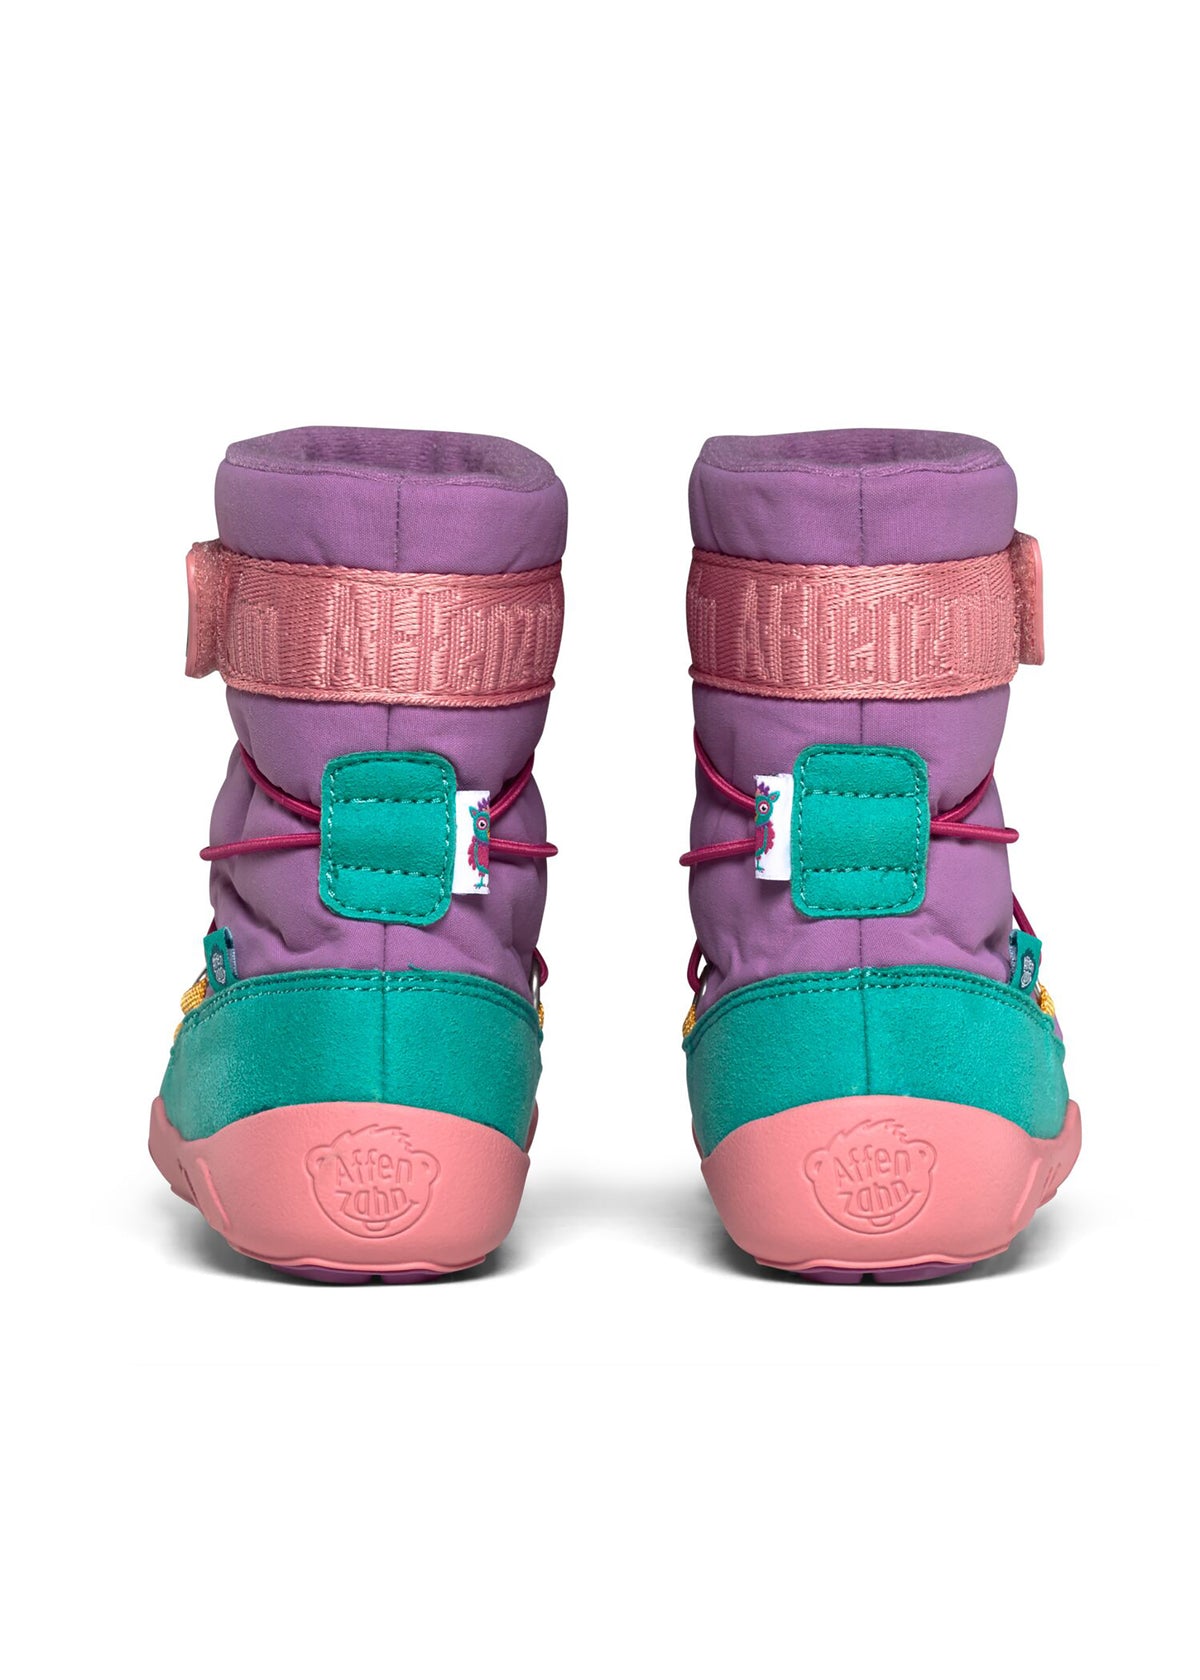 Children's barefoot shoes - Snowboot Owl, winter shoes with TEX membrane - pink, purple, turquoise, vegan